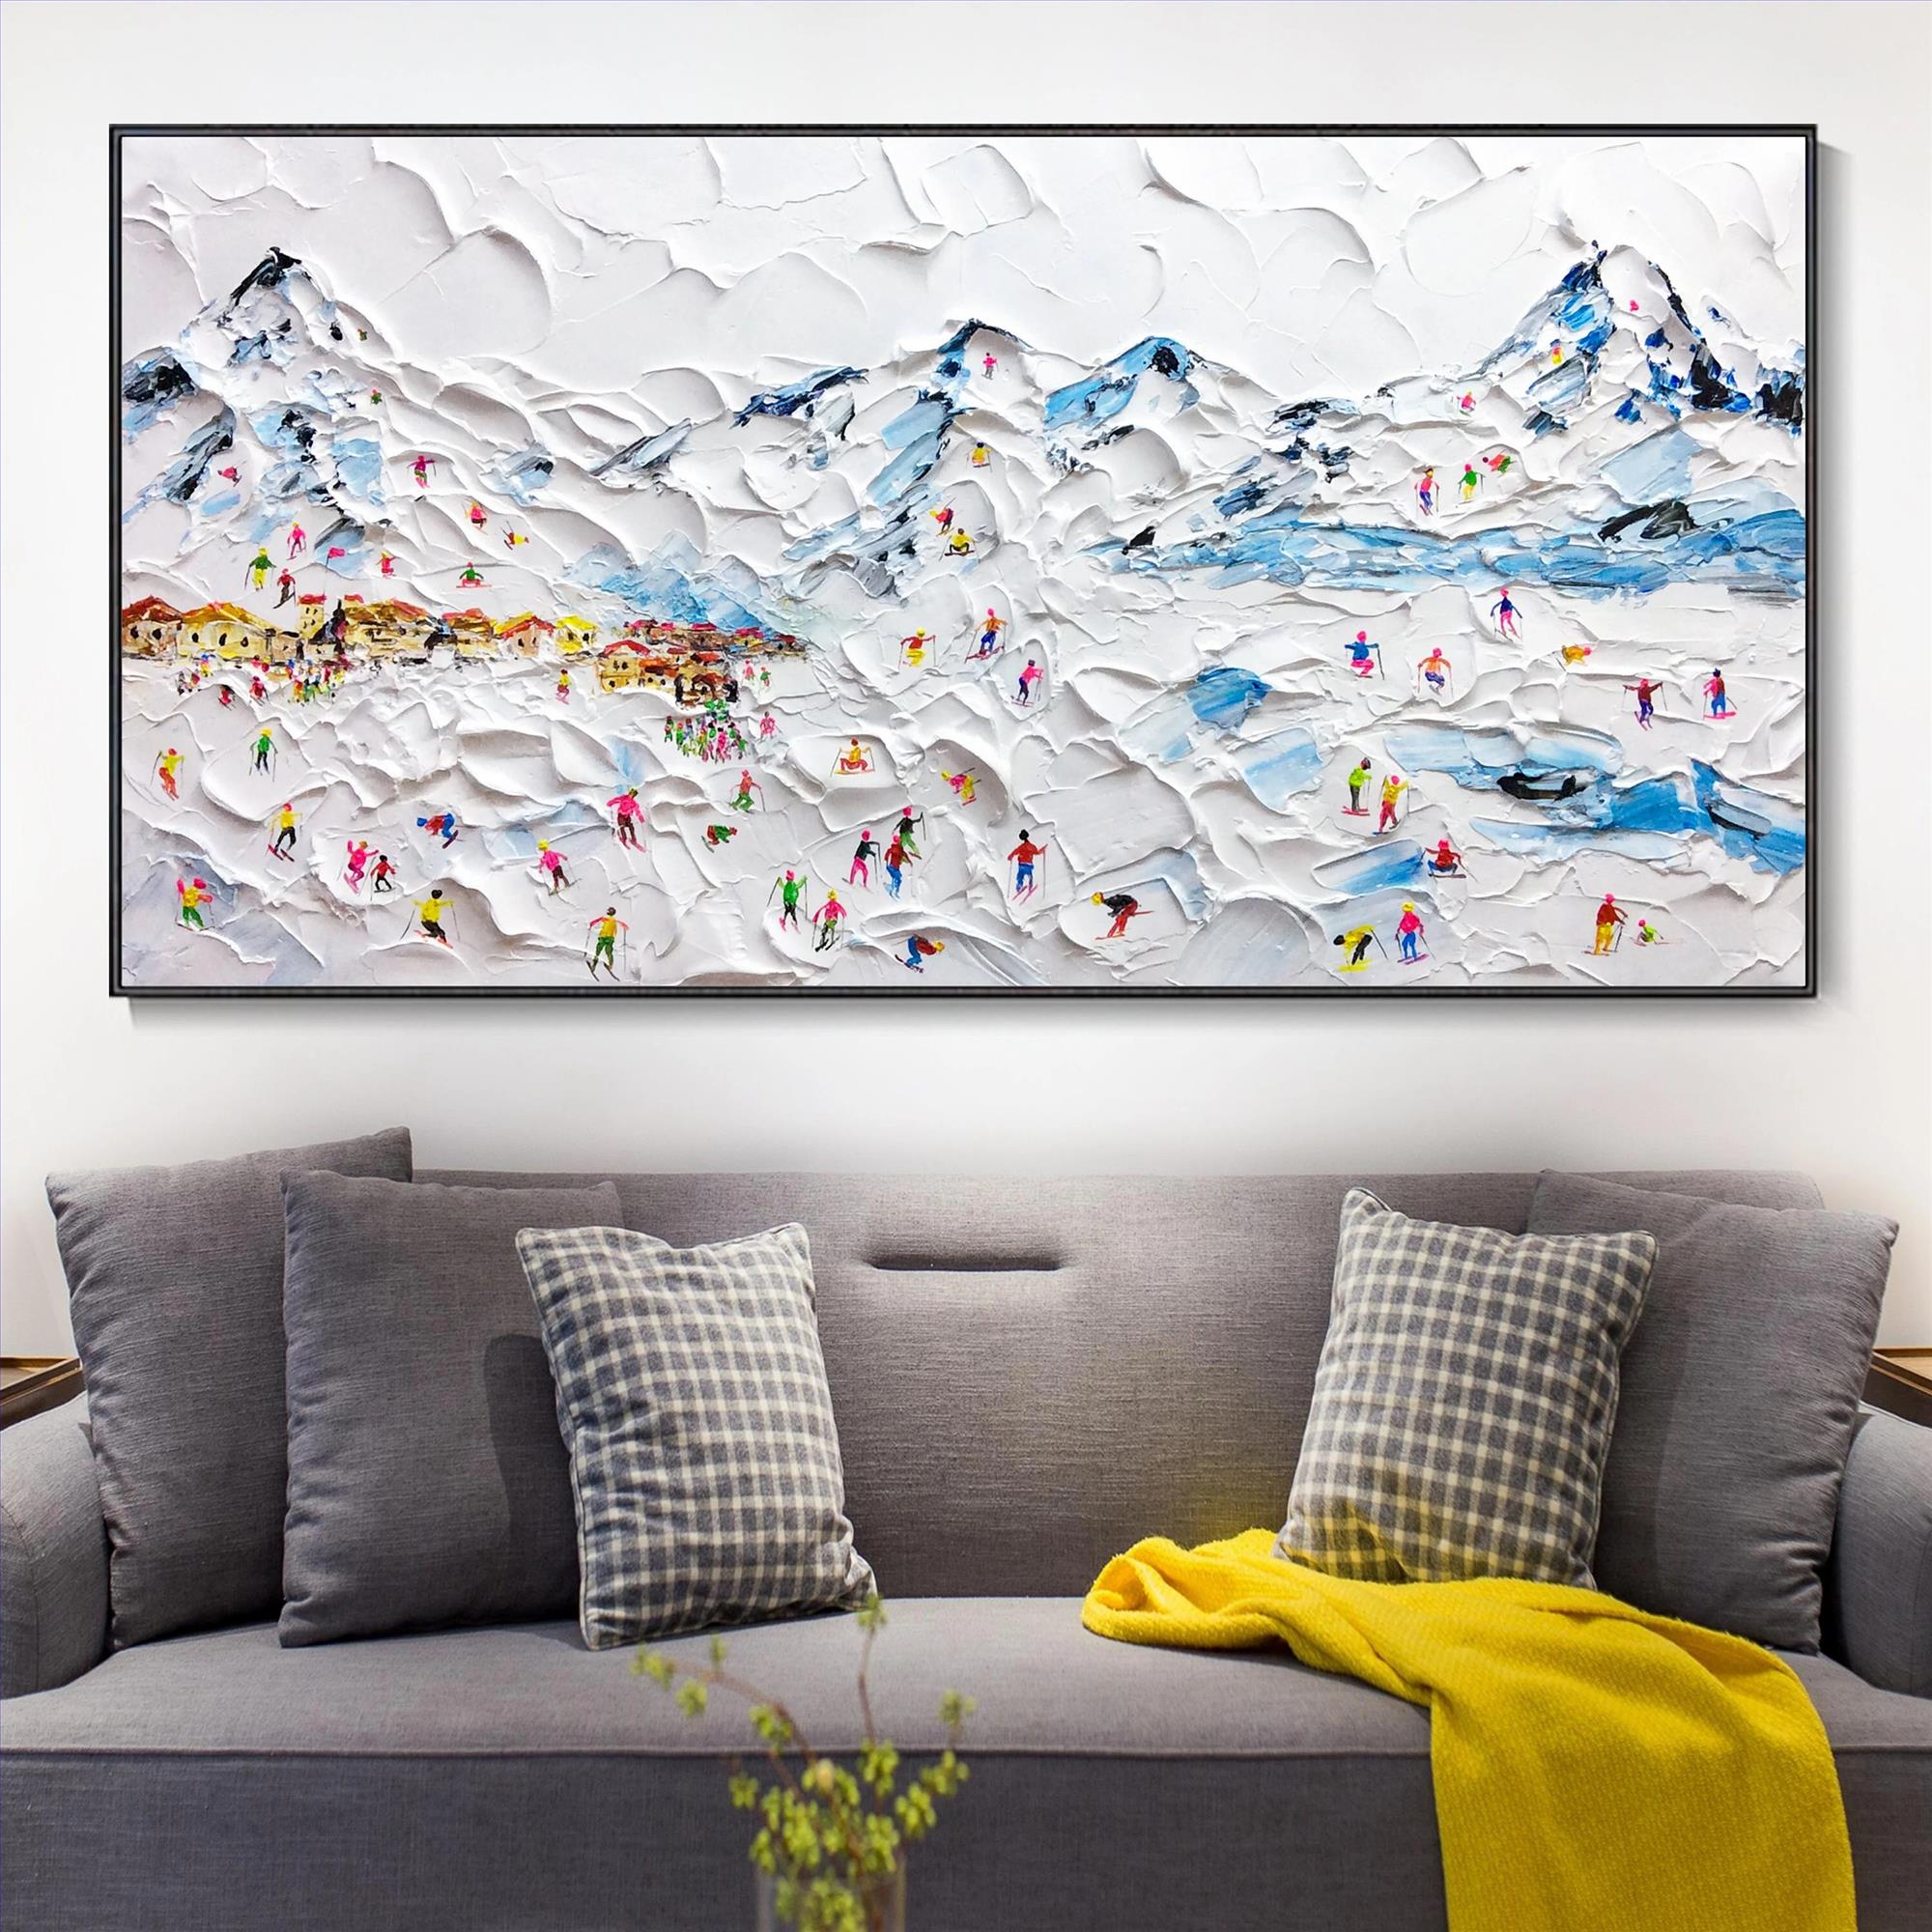 Skier on Snowy Mountain Wall Art Sport White Snow Skiing Room Decor by Knife 17 Oil Paintings